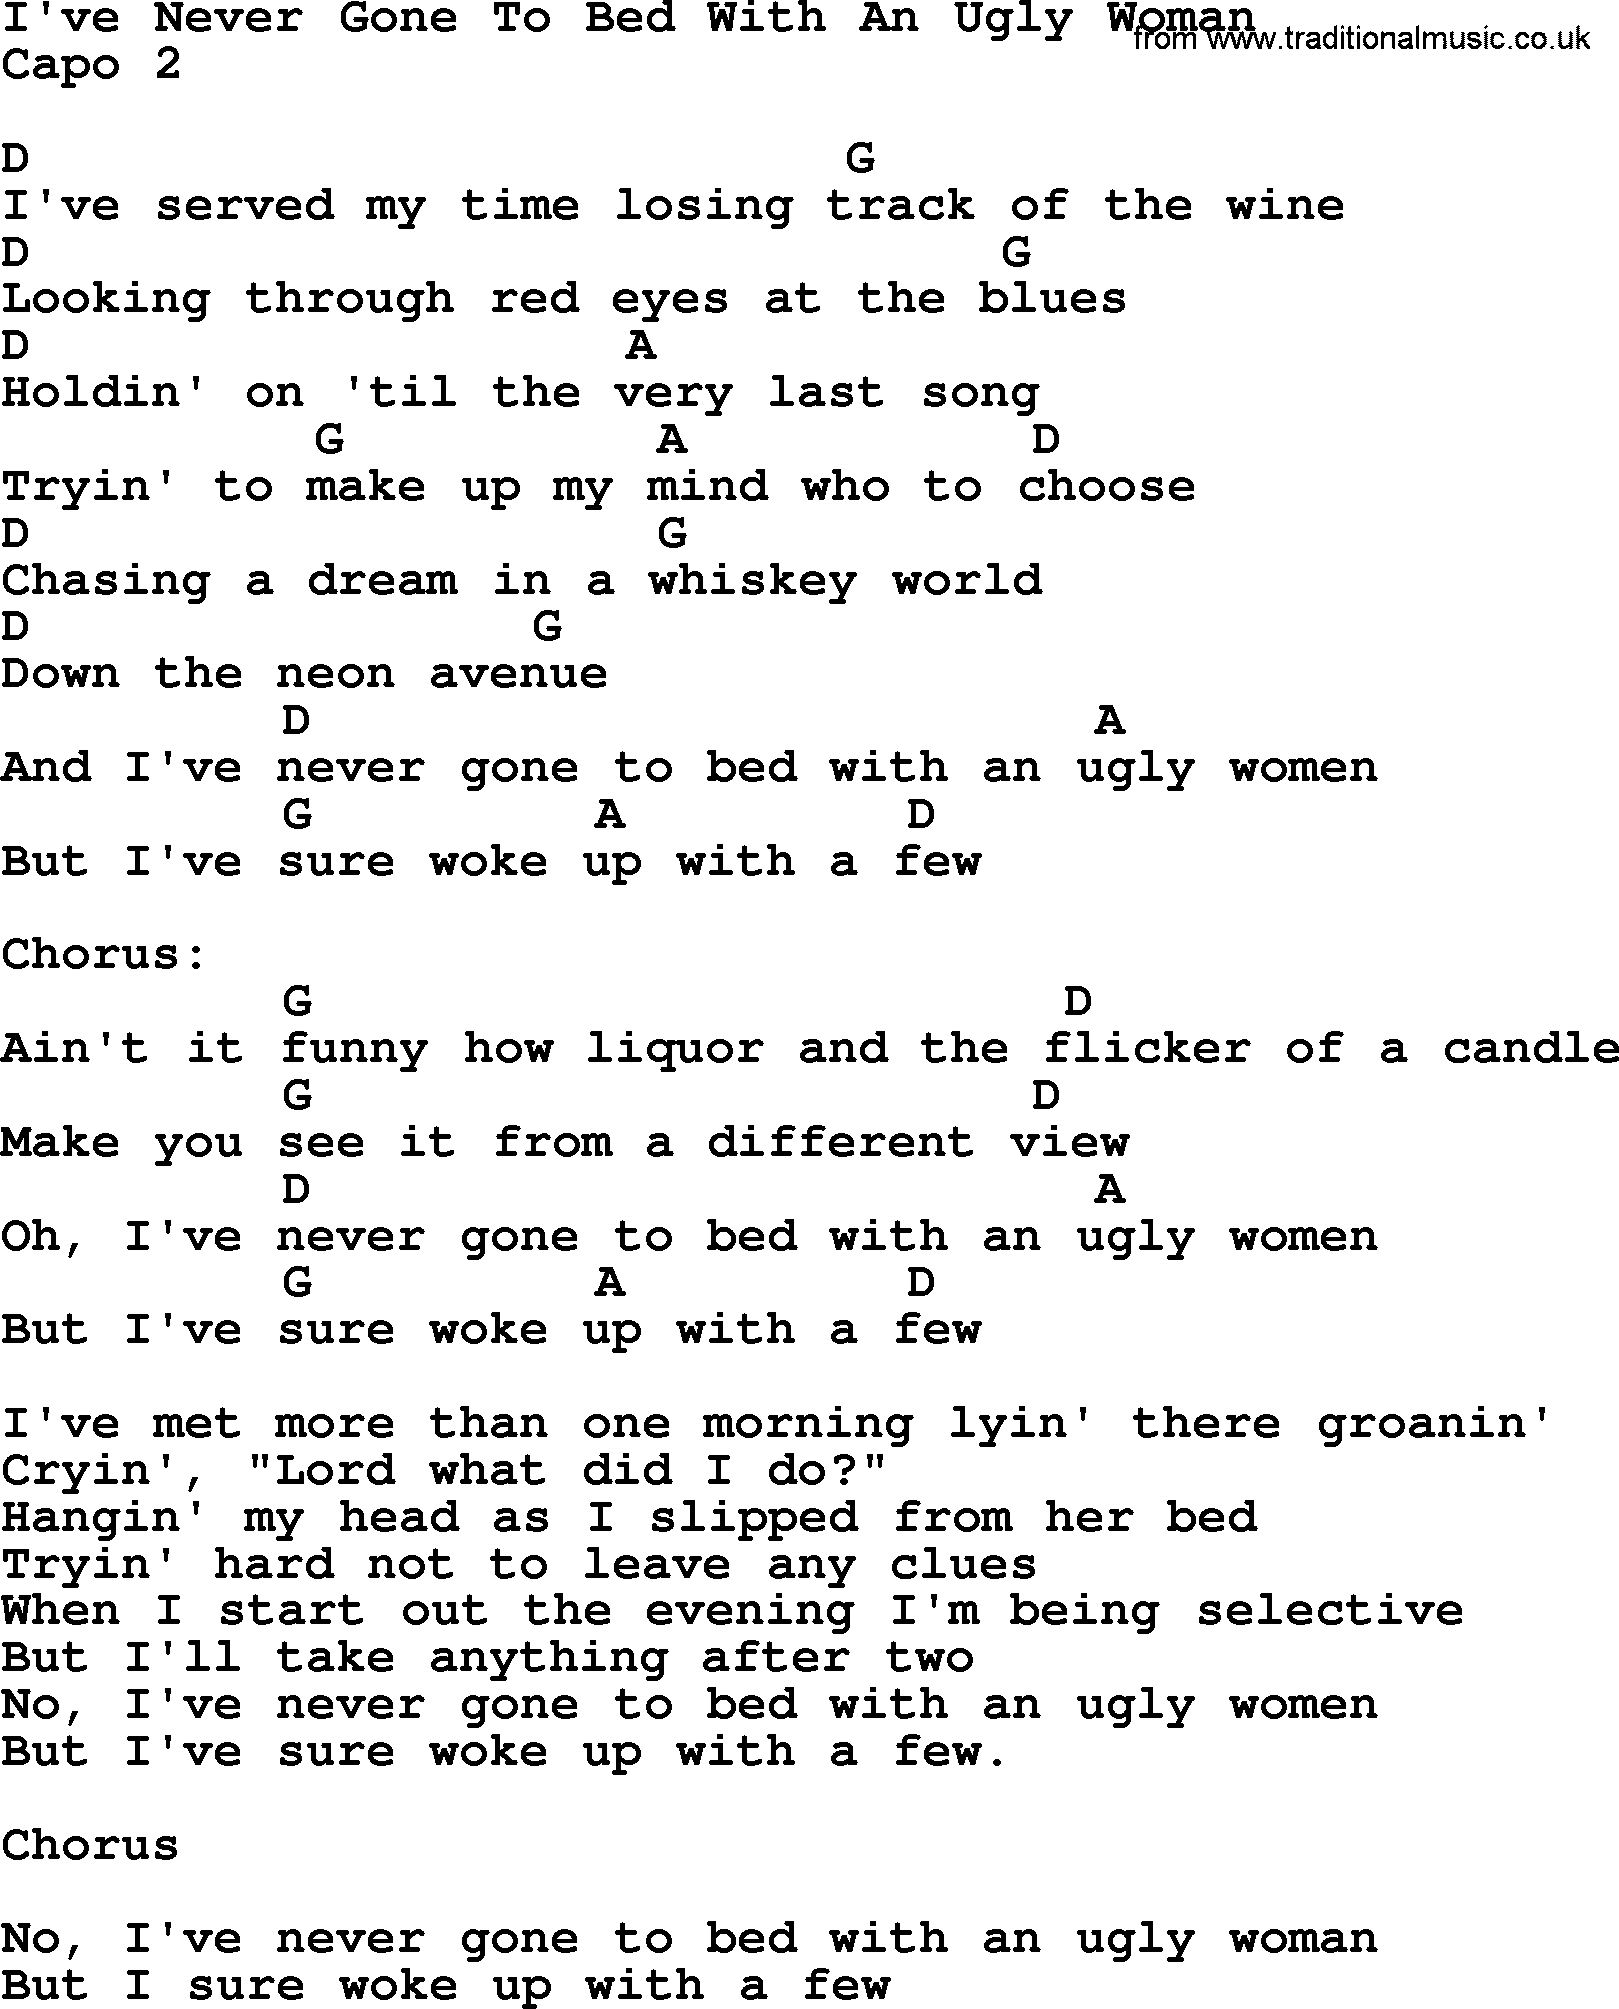 Bluegrass song: I've Never Gone To Bed With An Ugly Woman, lyrics and chords